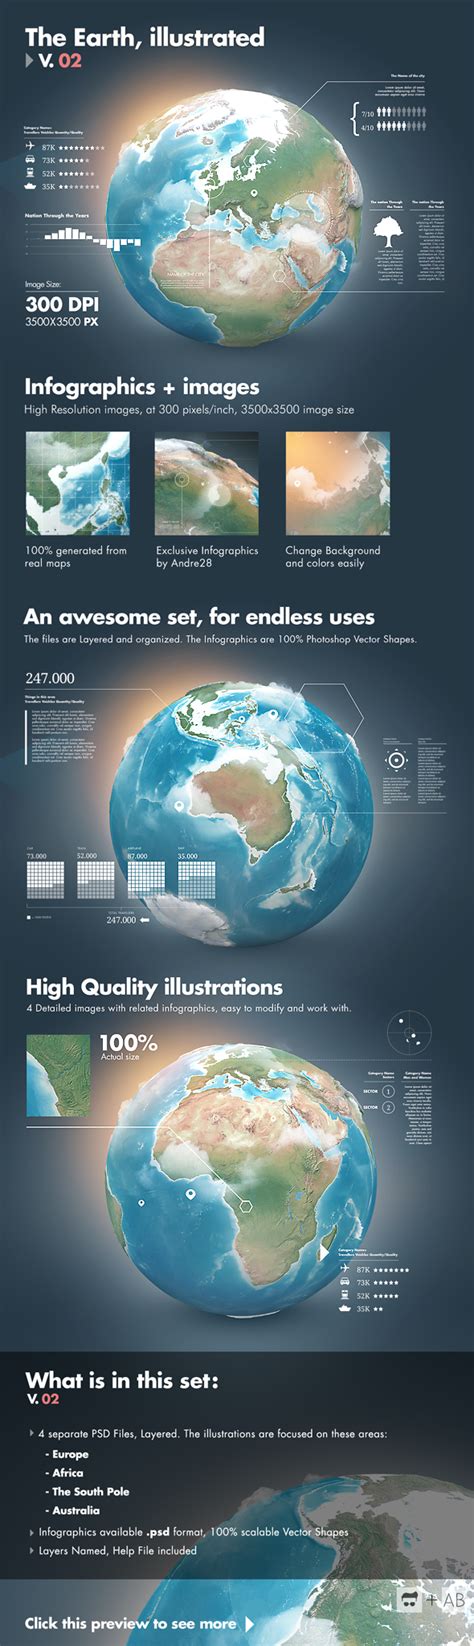 Earth Illustrated 3d World And Infographics V2 By Giallo86 On Deviantart